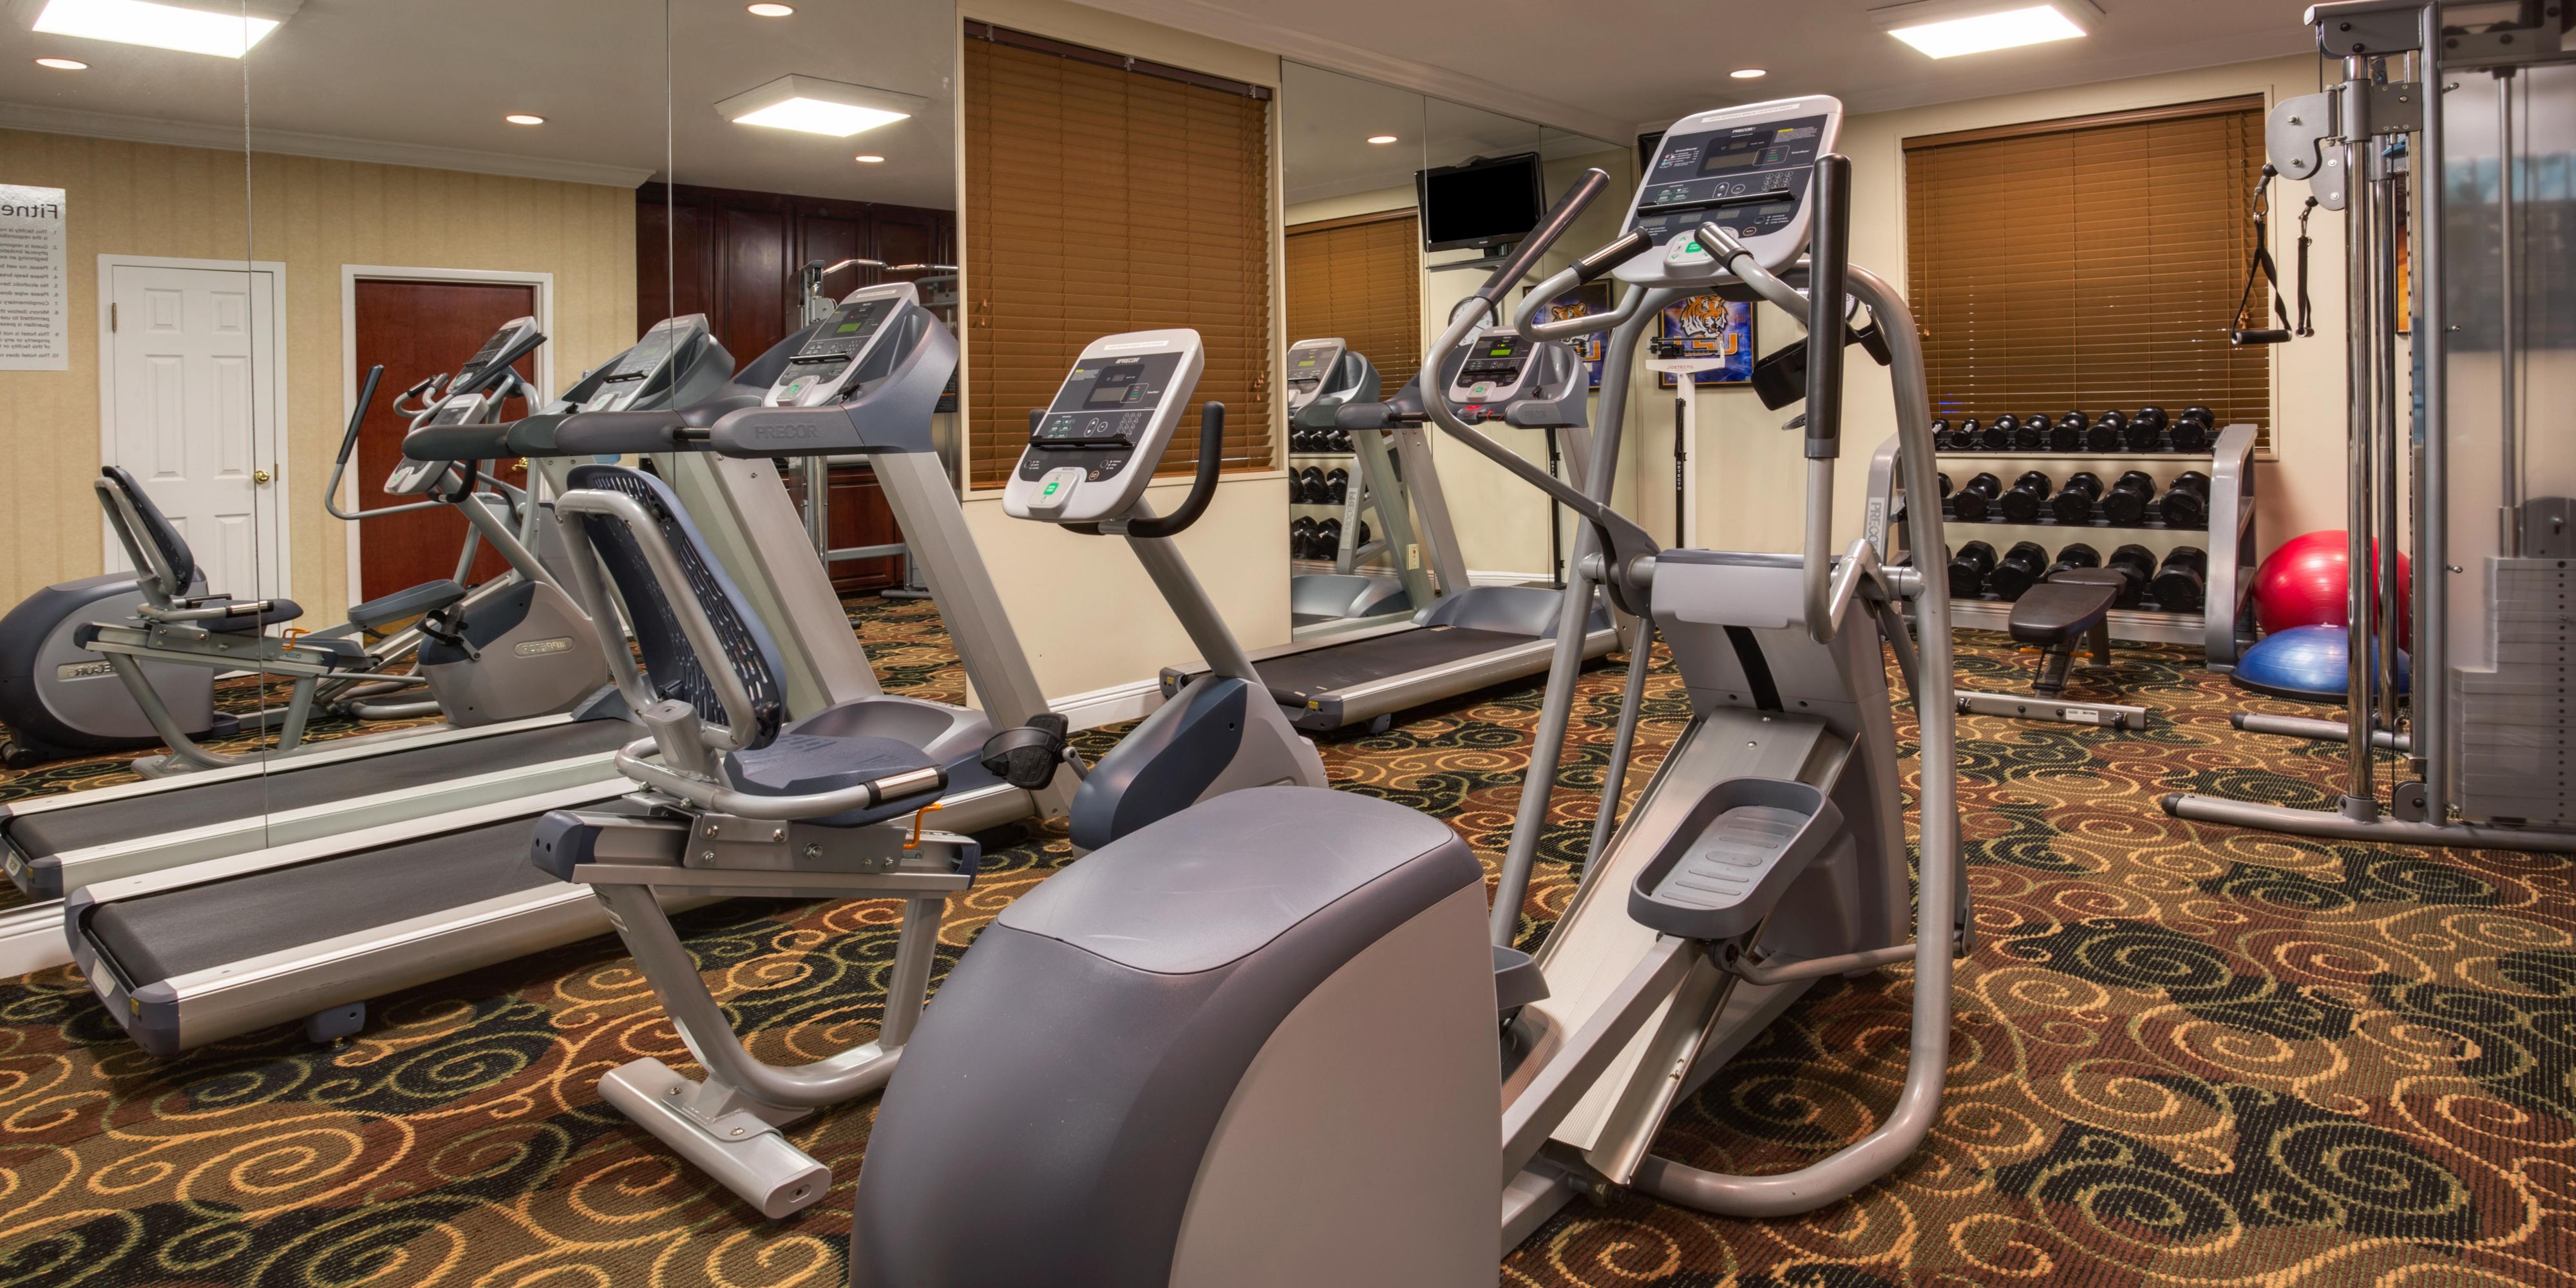 Our guest can take advantage of our 24 Hour Fitness Center where you will find treadmills, elliptical machine, free weights and or stationary bike available just for you!!!  Stay smart and fit when you stay with us!